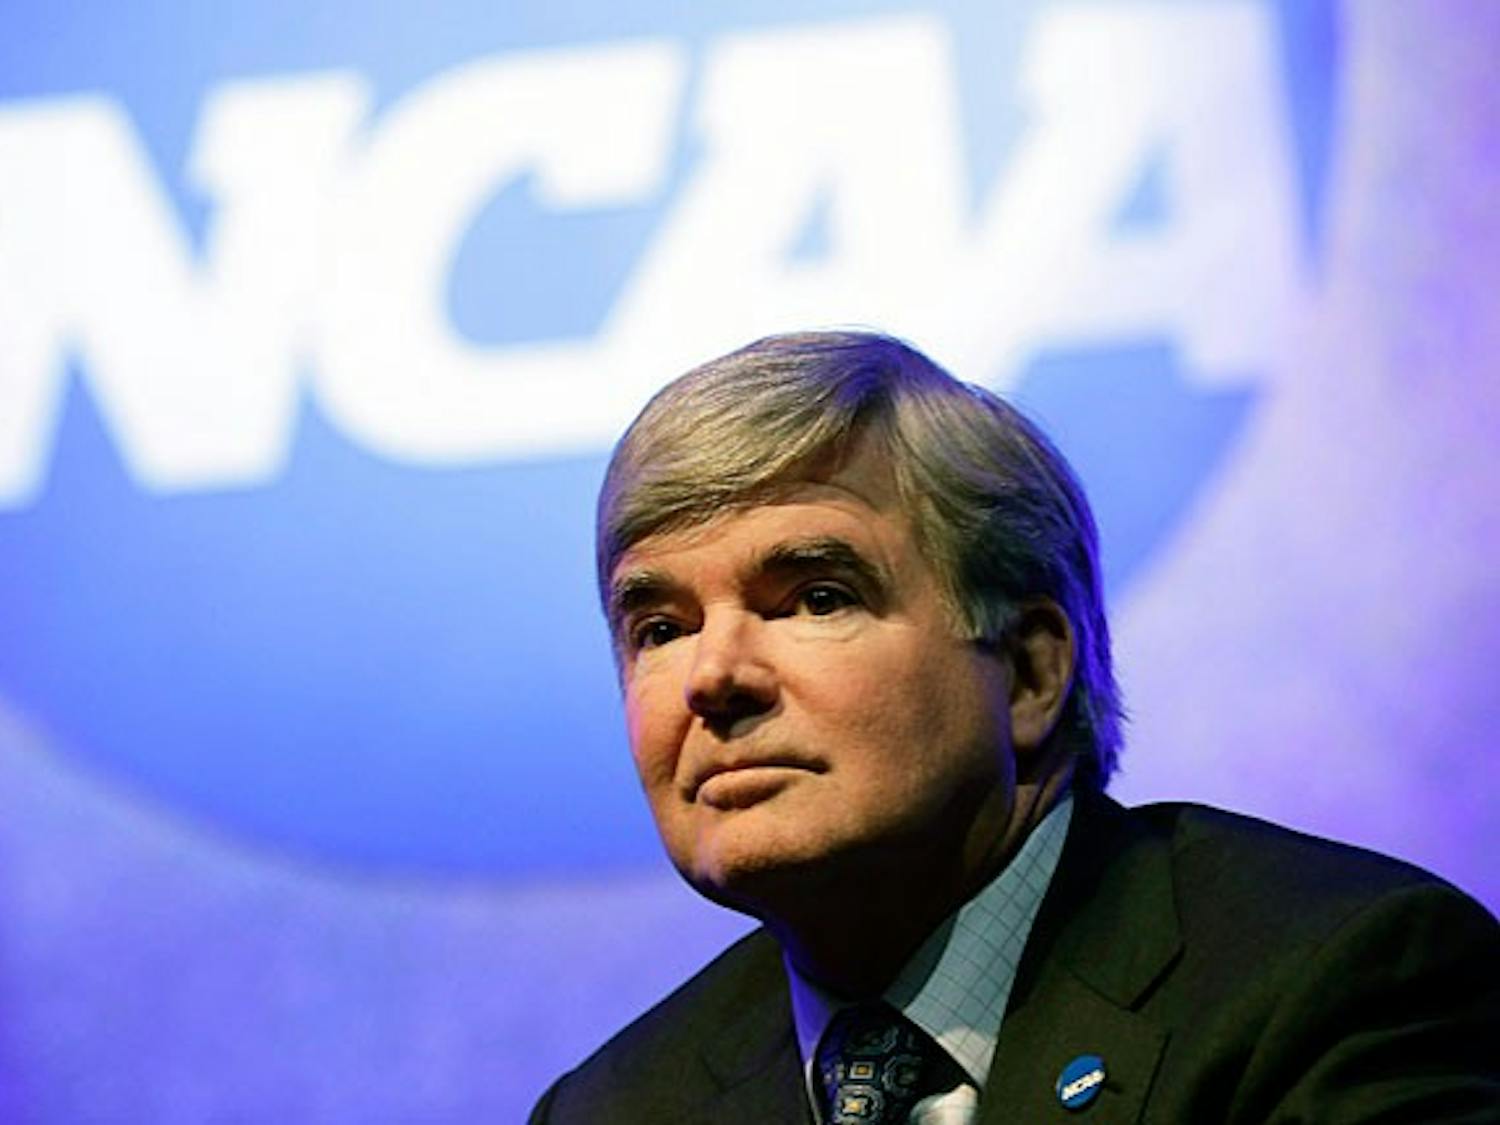 Mark Emmert, president of the NCAA, made sweeping changes to recruiting, but are they right for college athletics? Photo courtesy Sports Illustrated